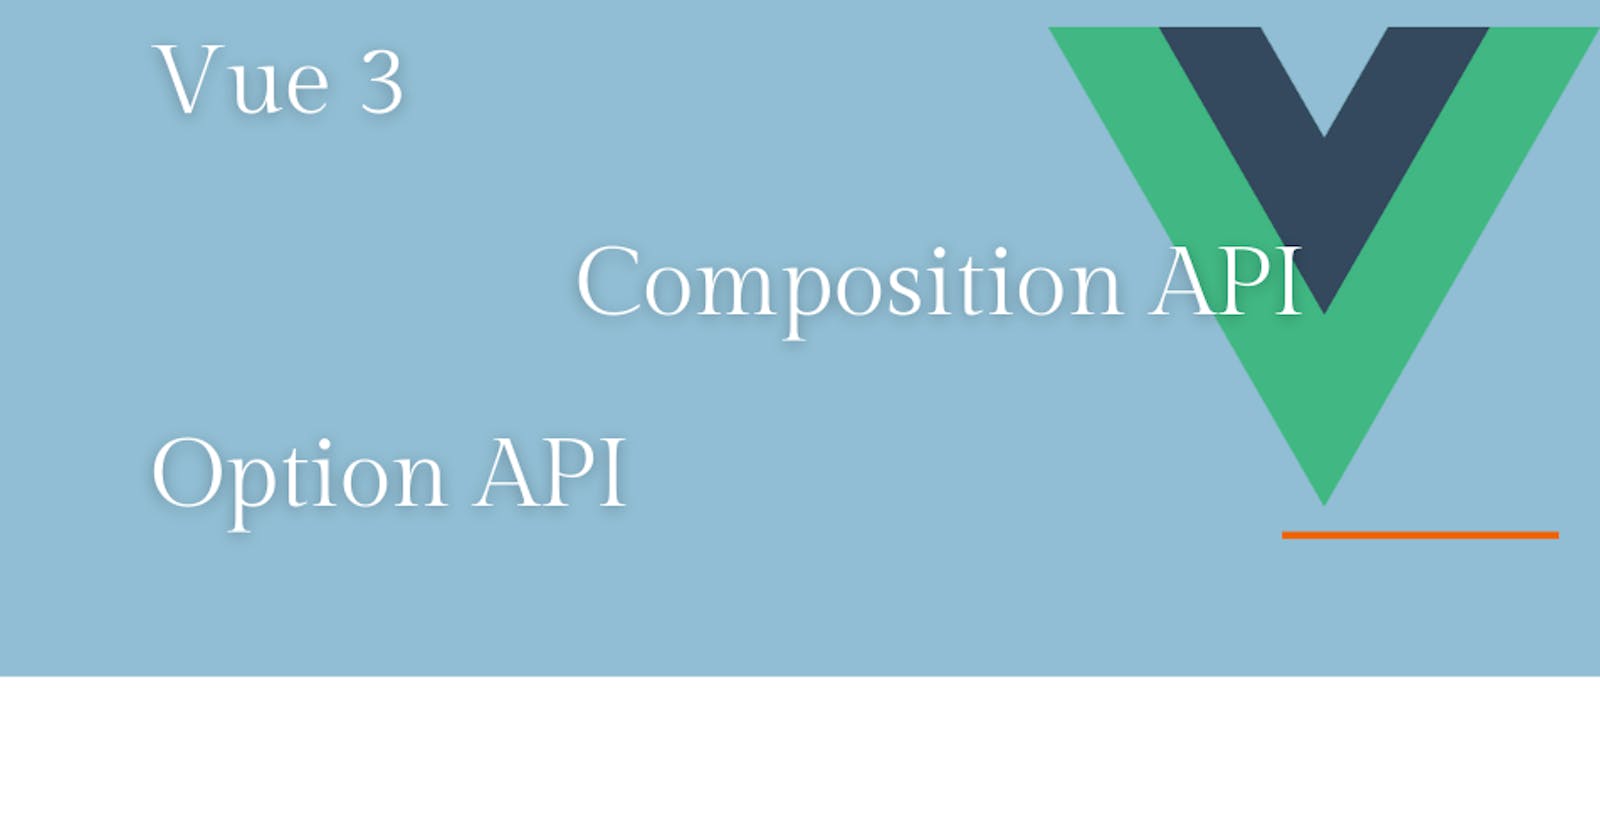 What is Composition API?